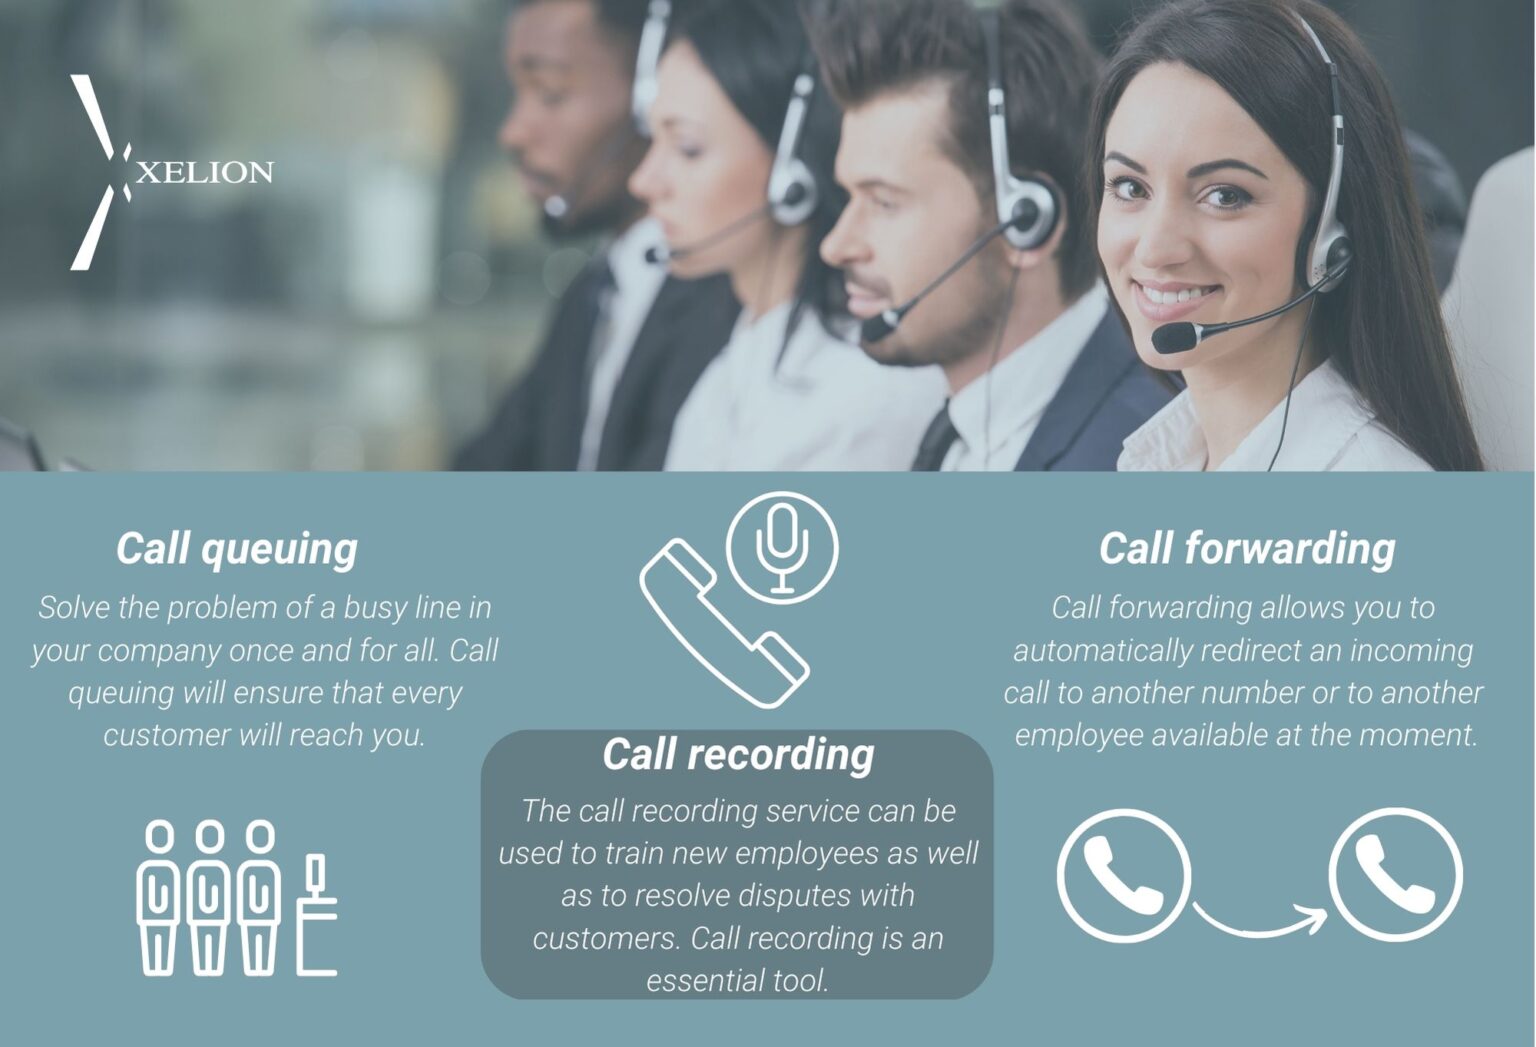 Call queuing, call recording, and call forwarding are essential tools ...